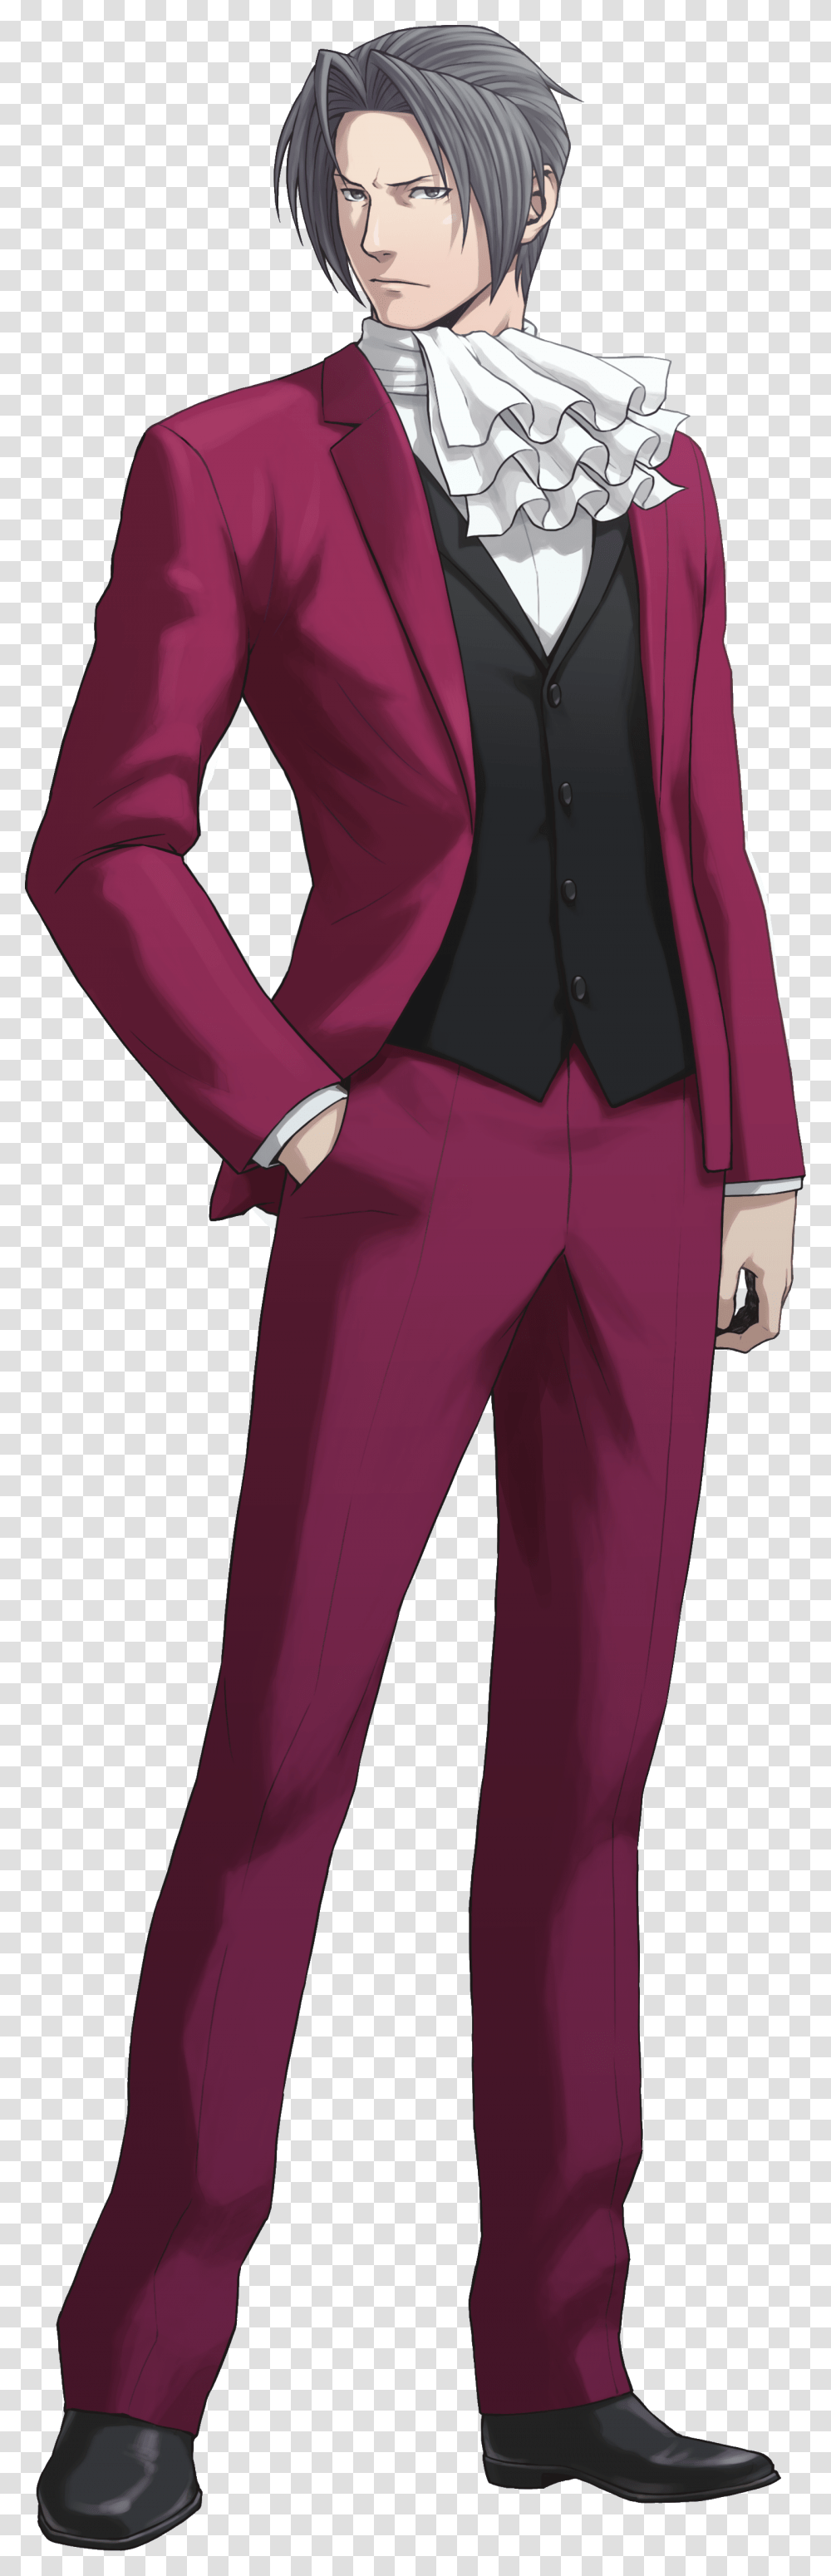 User Based Personality Rp Wikia Ace Attorney Miles Edgeworth, Suit, Overcoat, Long Sleeve Transparent Png